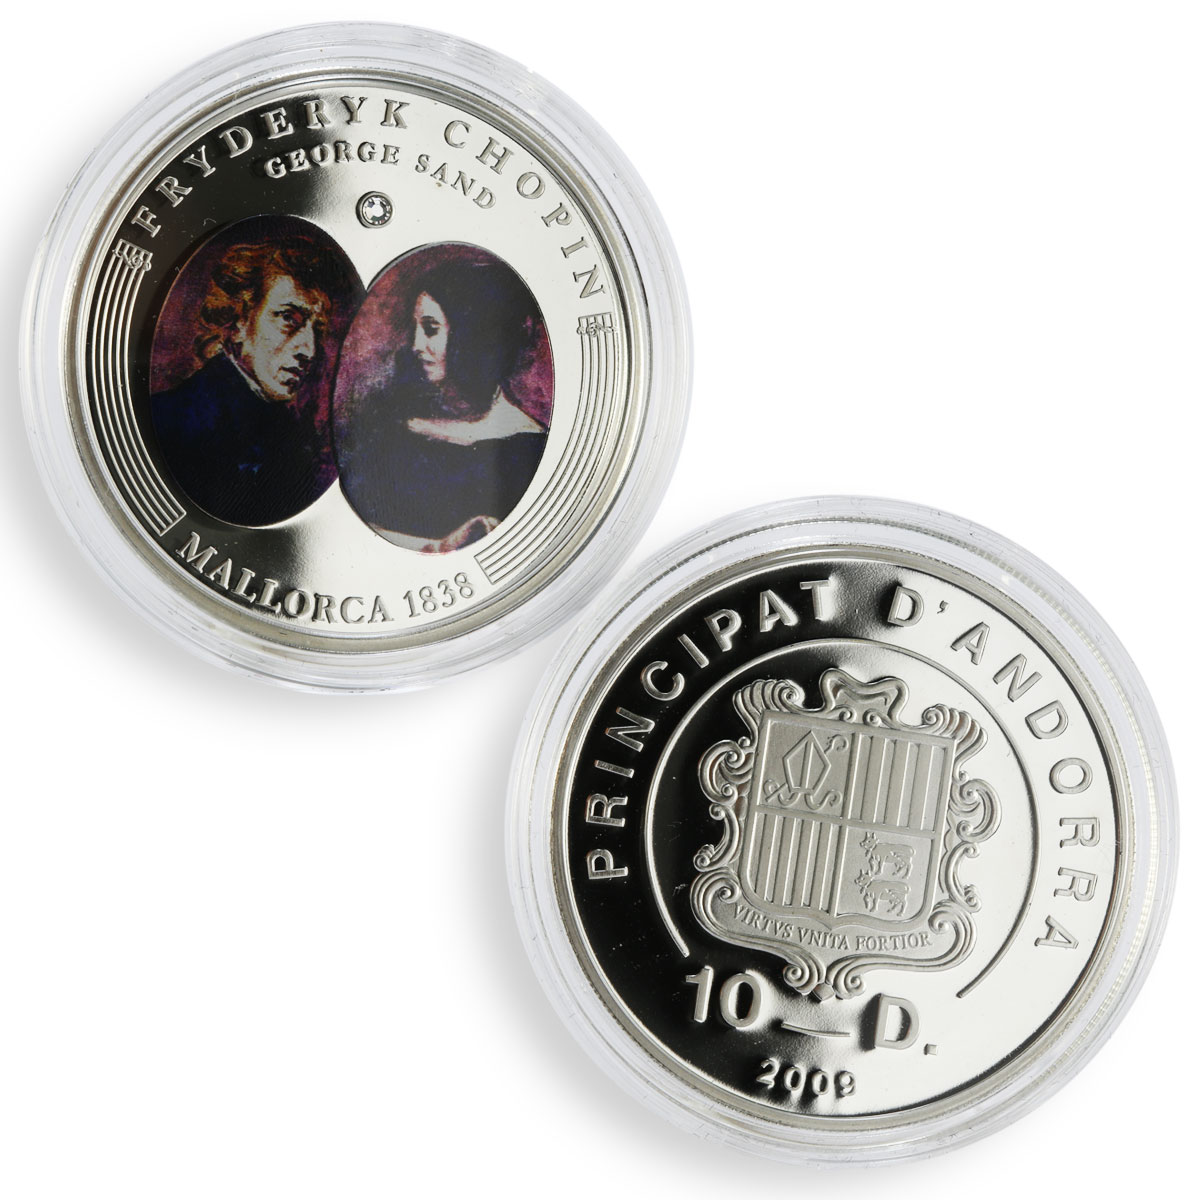 Andorra set of 8 coins Frederic Chopin's Anniversary colored silver coin 2009